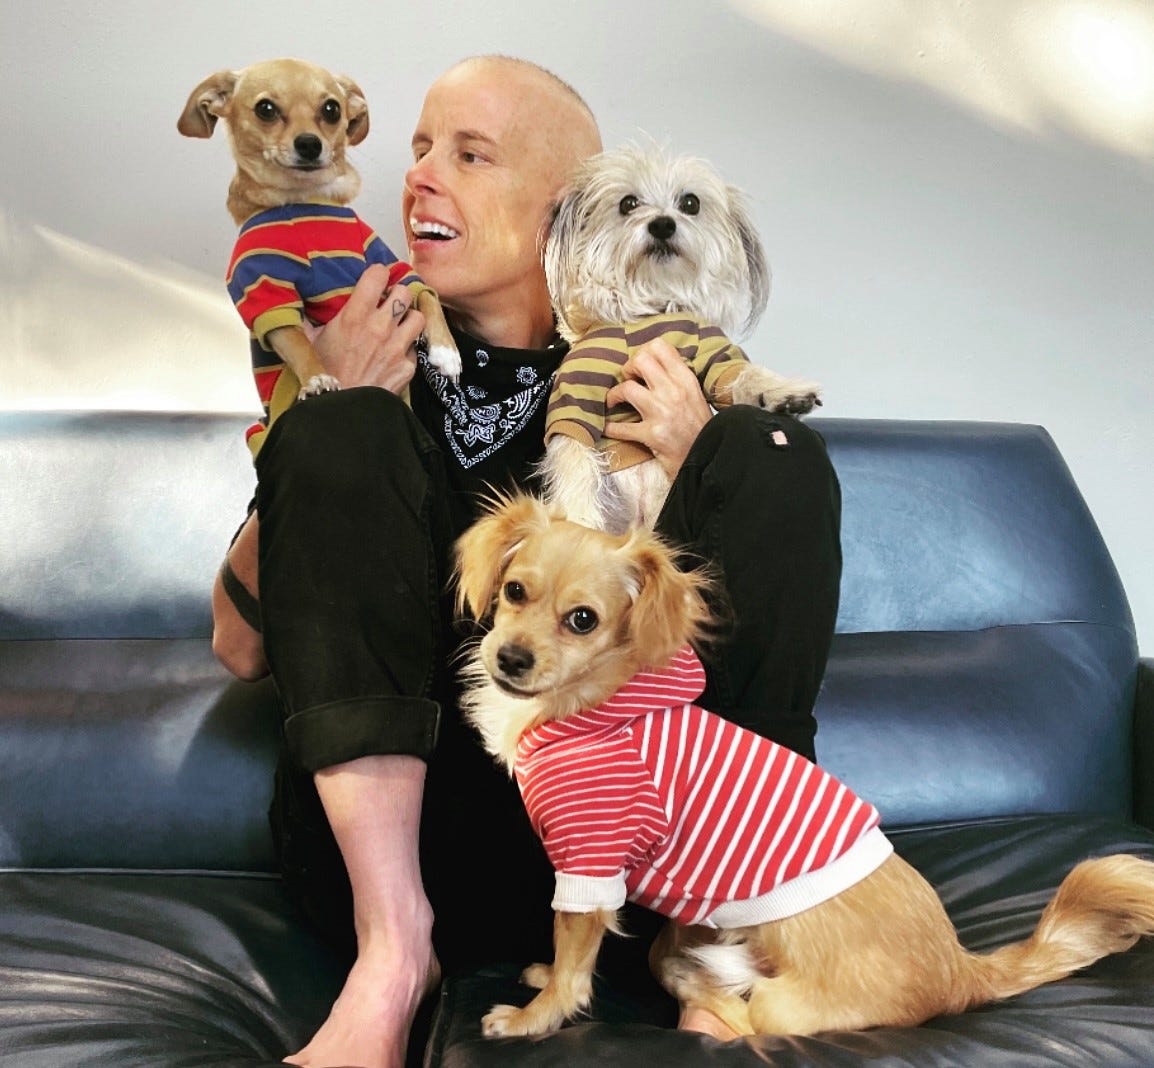 Andrea sits on a black couch, wearing a black bandana around their neck. They are holding Idgie and Squash. Winnie sits in front of them, looking at the camera. All the dogs are wearing colorful striped shirts. 